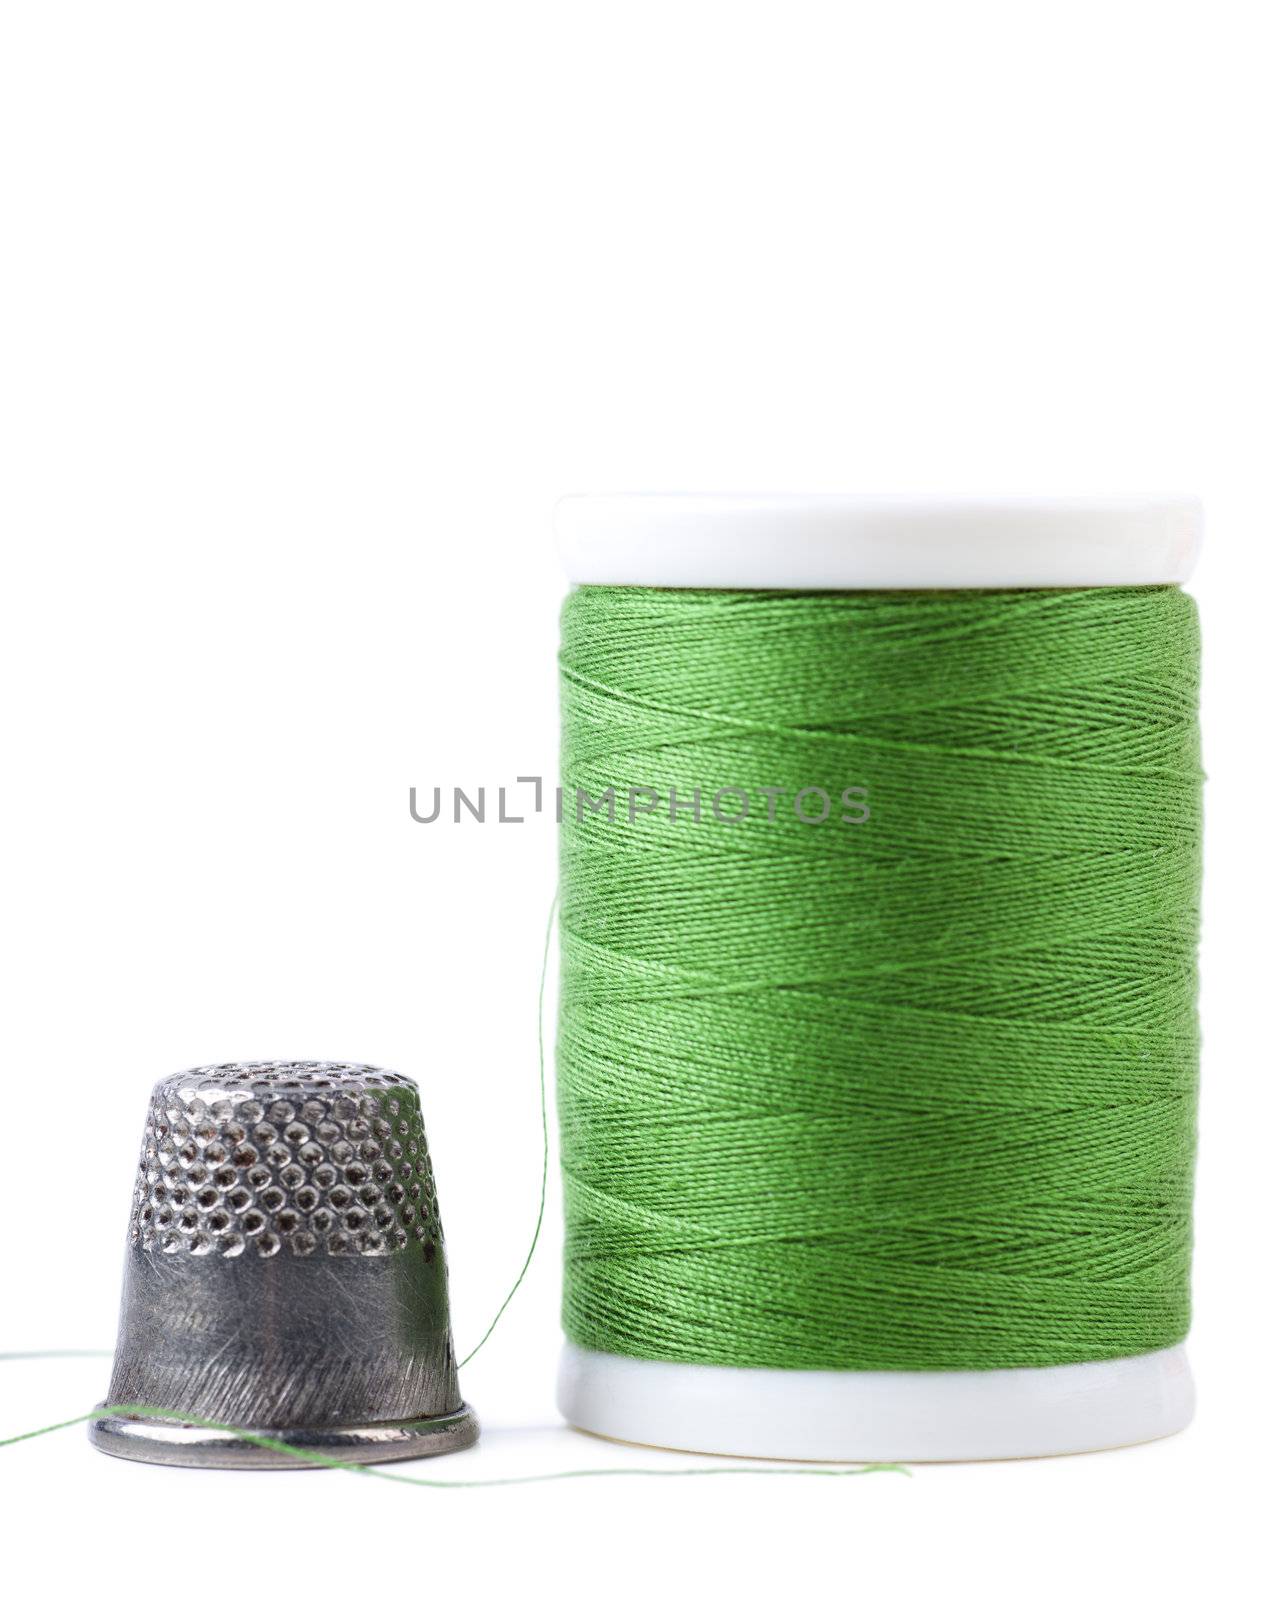 Single spool with green thread and thimble